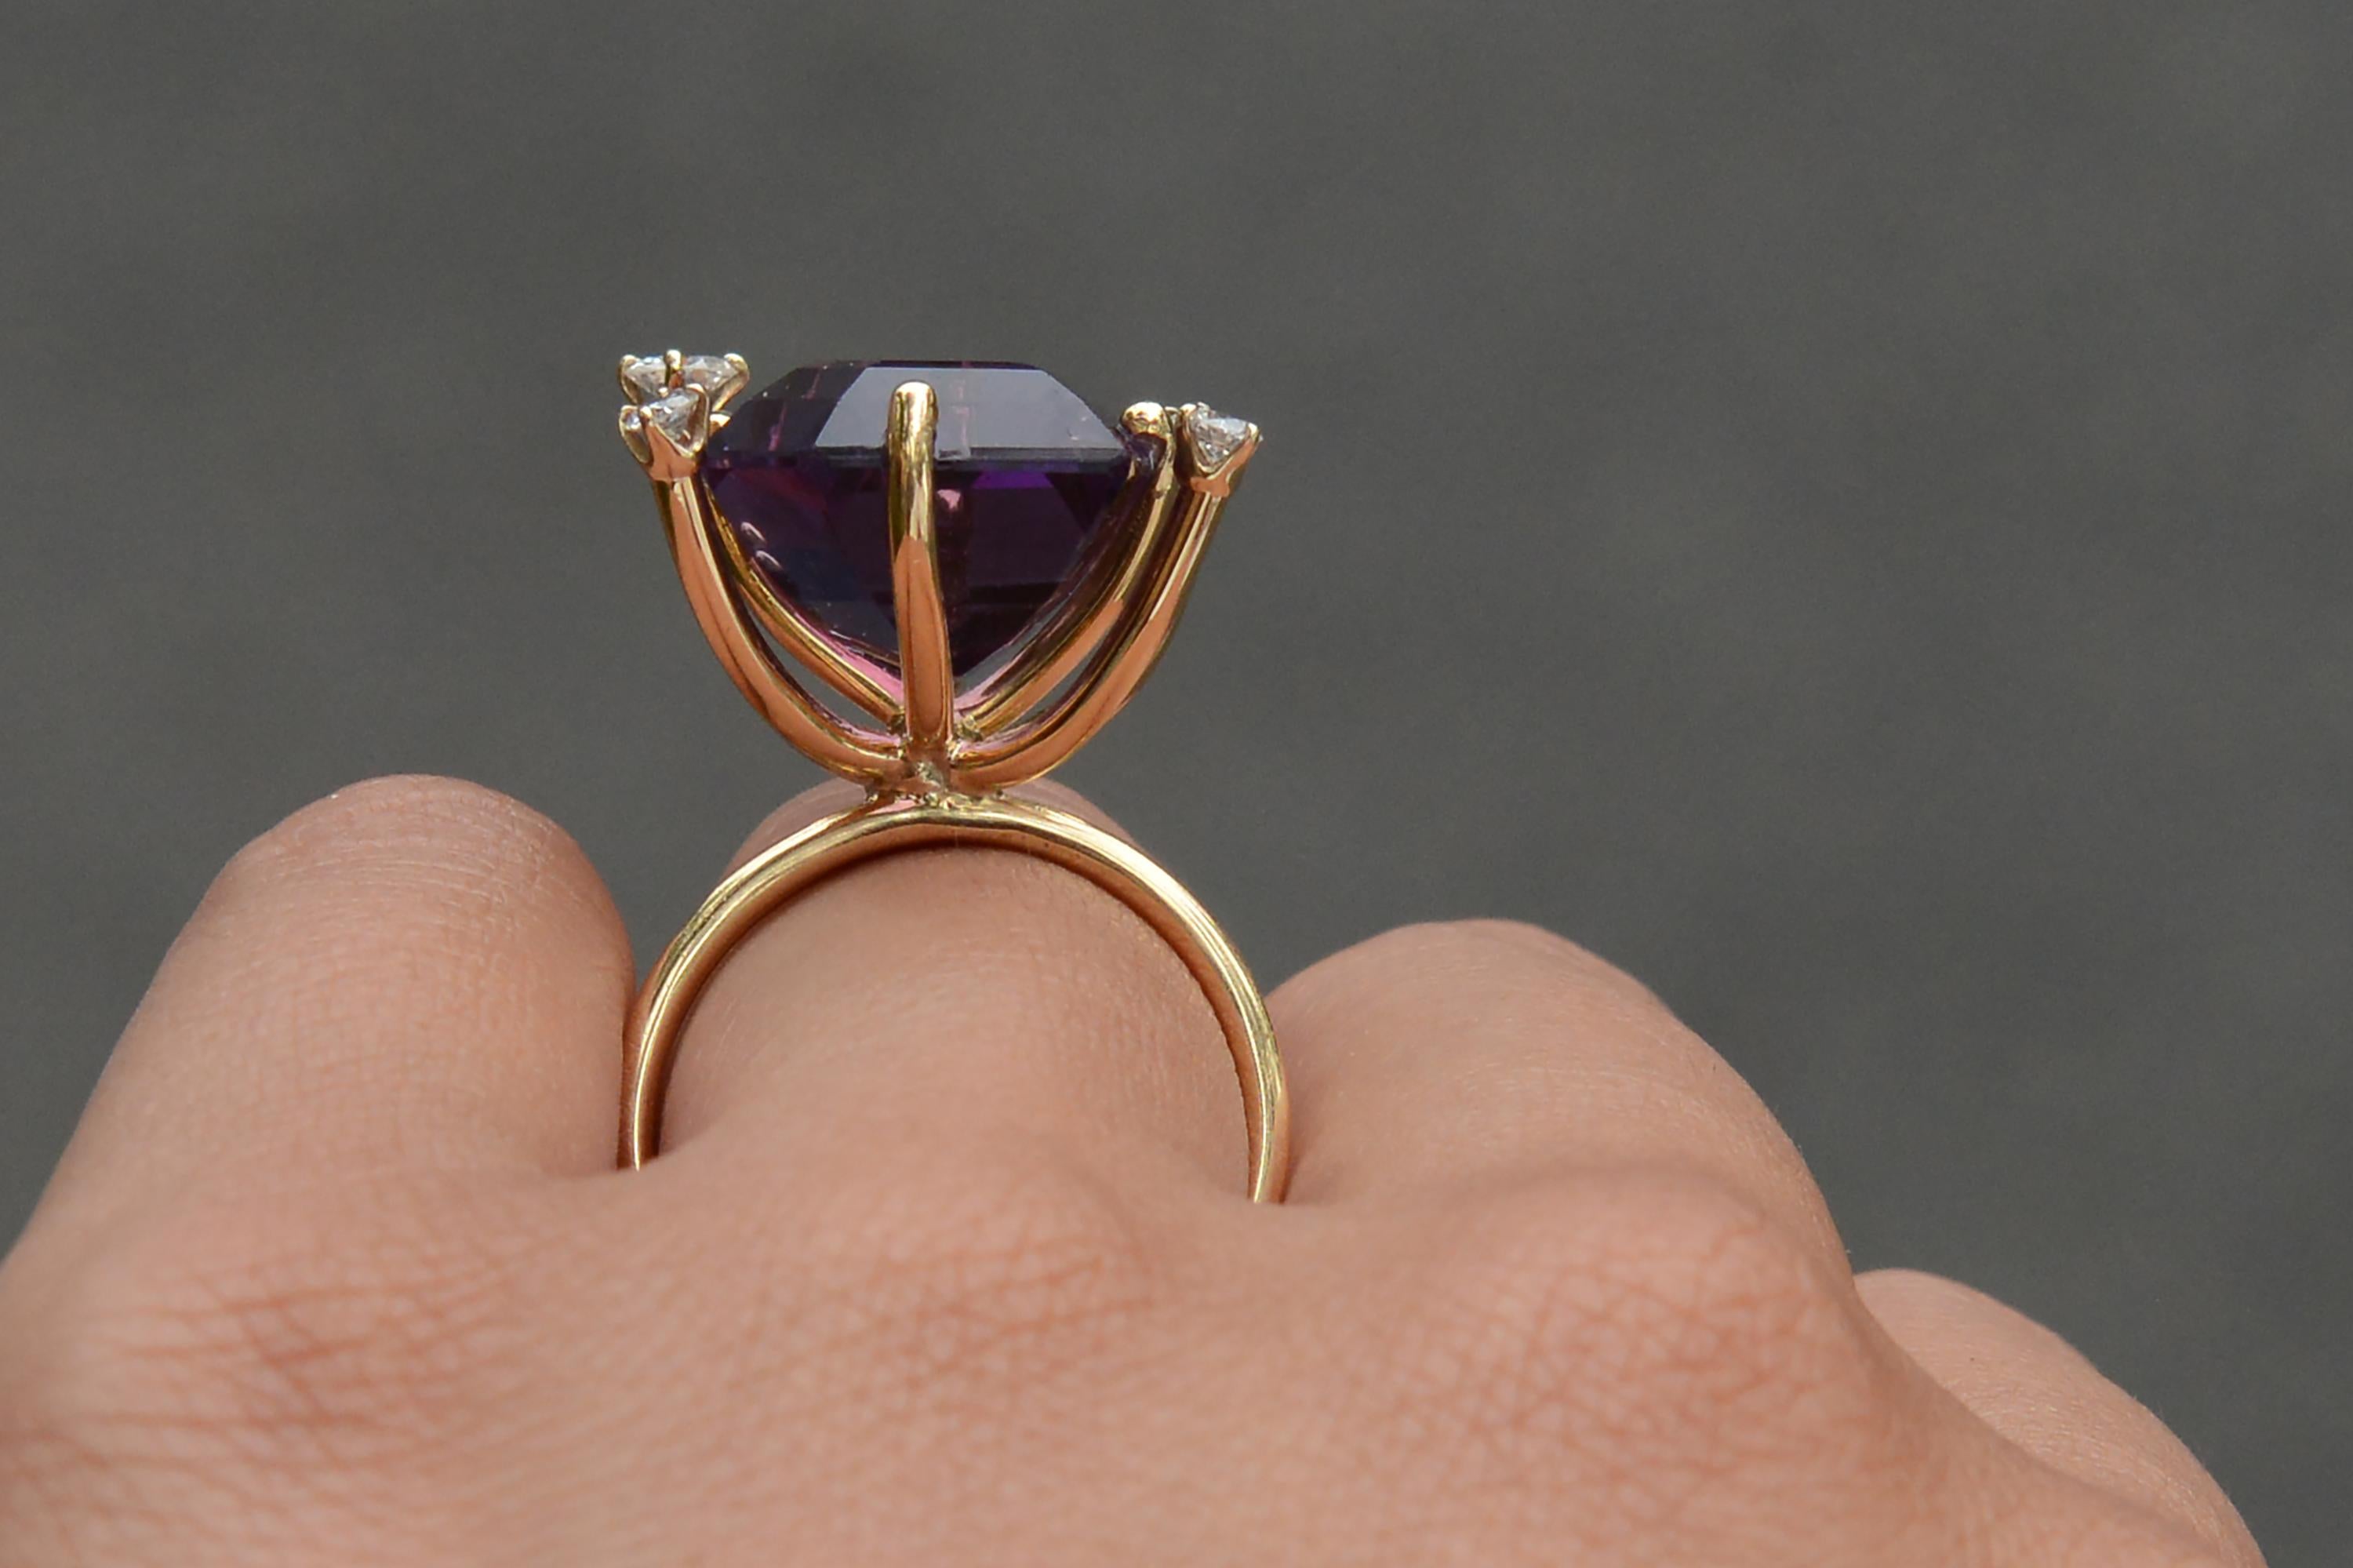 Vintage Modernist Amethyst and Diamond Cocktail Ring In Good Condition For Sale In Santa Barbara, CA